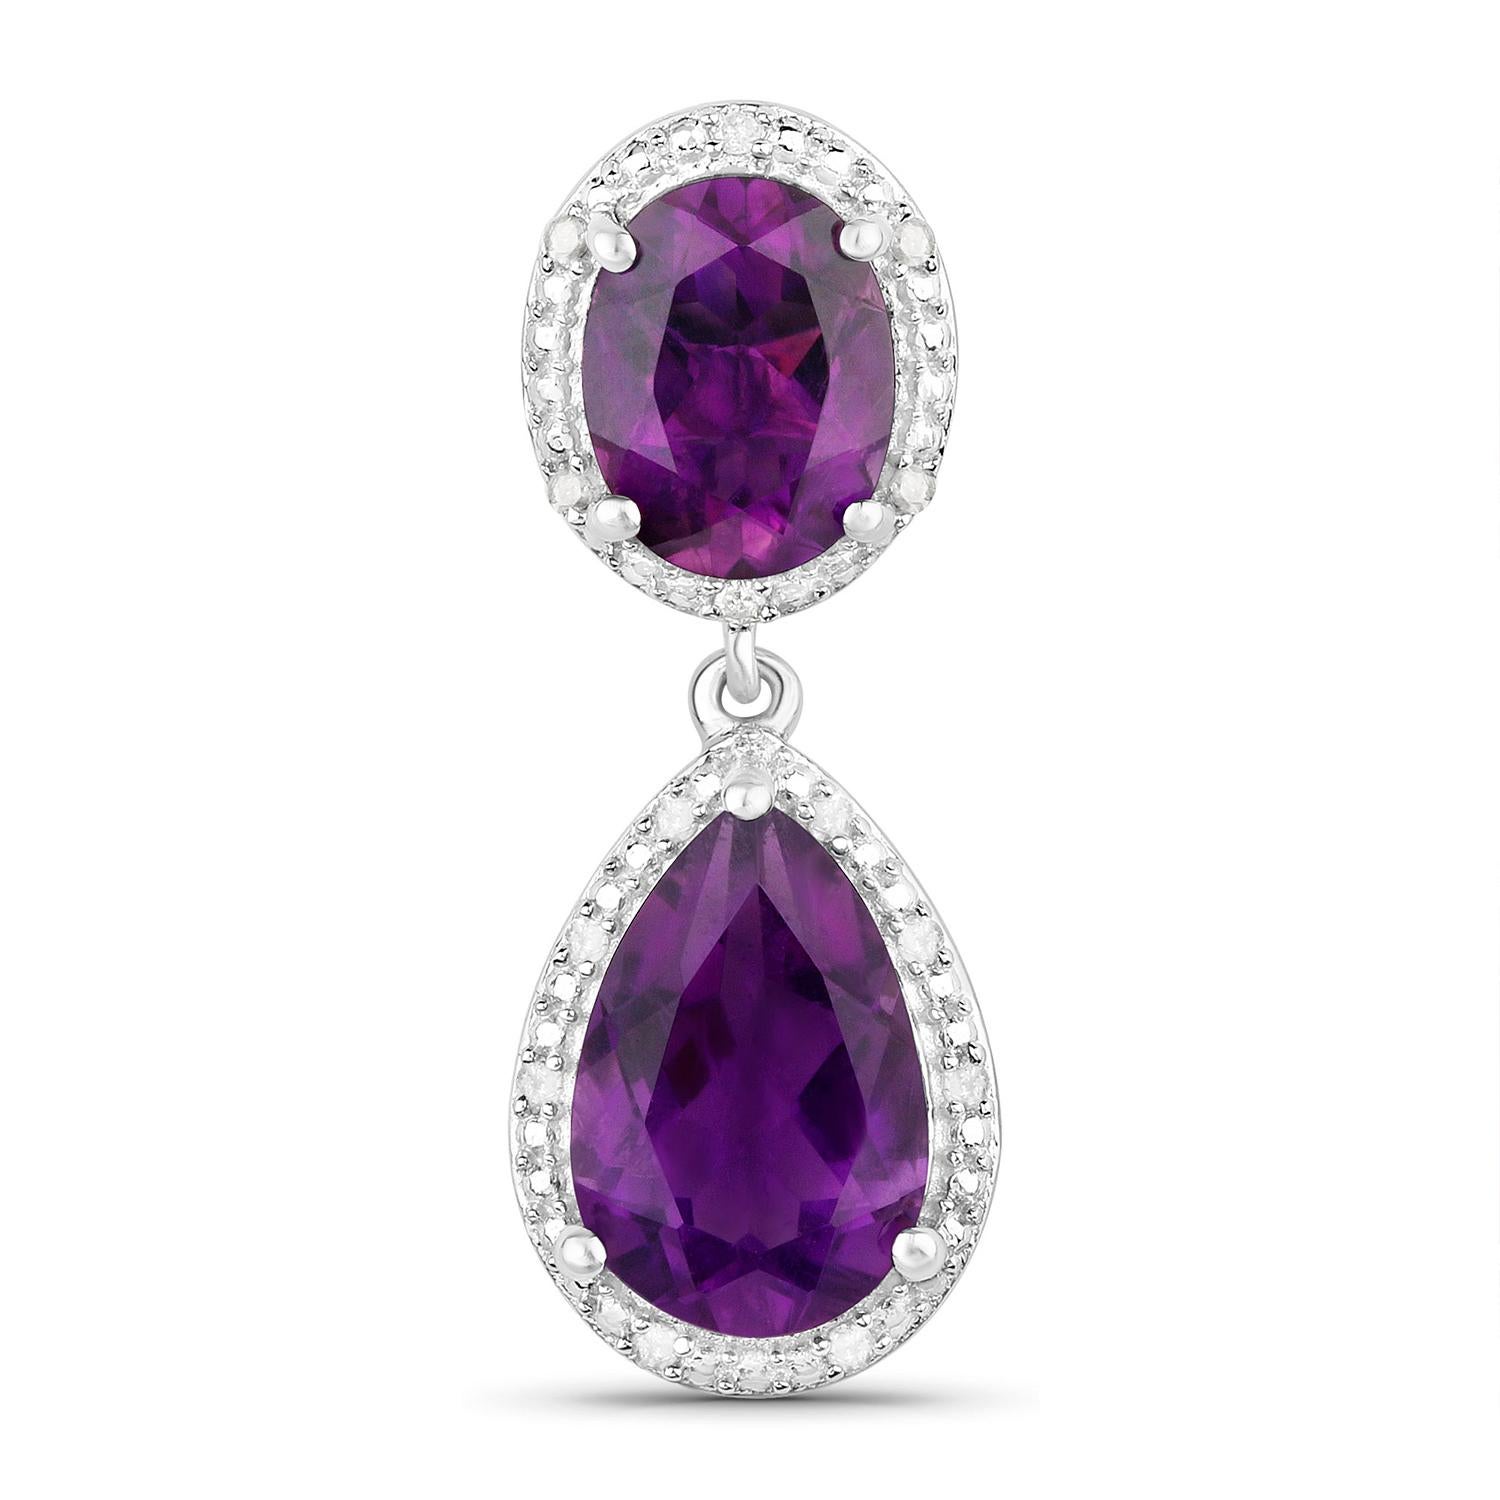 Mixed Cut Amethyst Earrings With Diamonds 8.45 Carats Rhodium Plated Sterling Silver For Sale